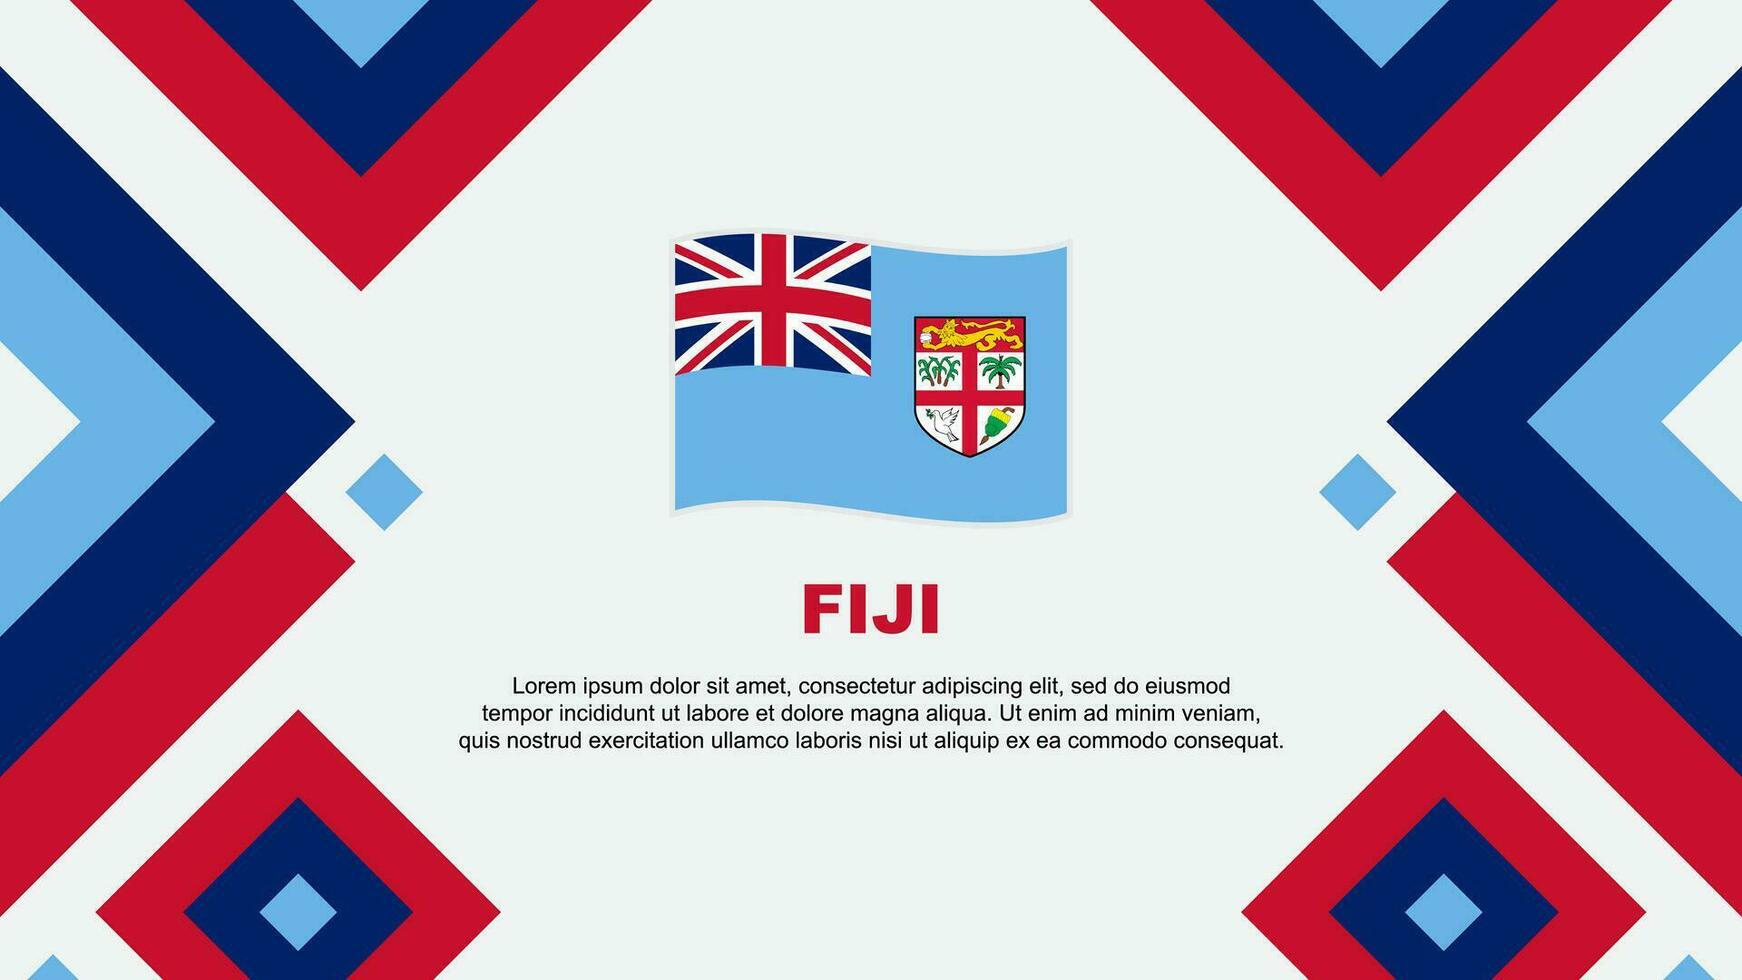 Fiji Flag Abstract Background Design Template. Fiji Independence Day Banner Wallpaper Vector Illustration. Fiji Template